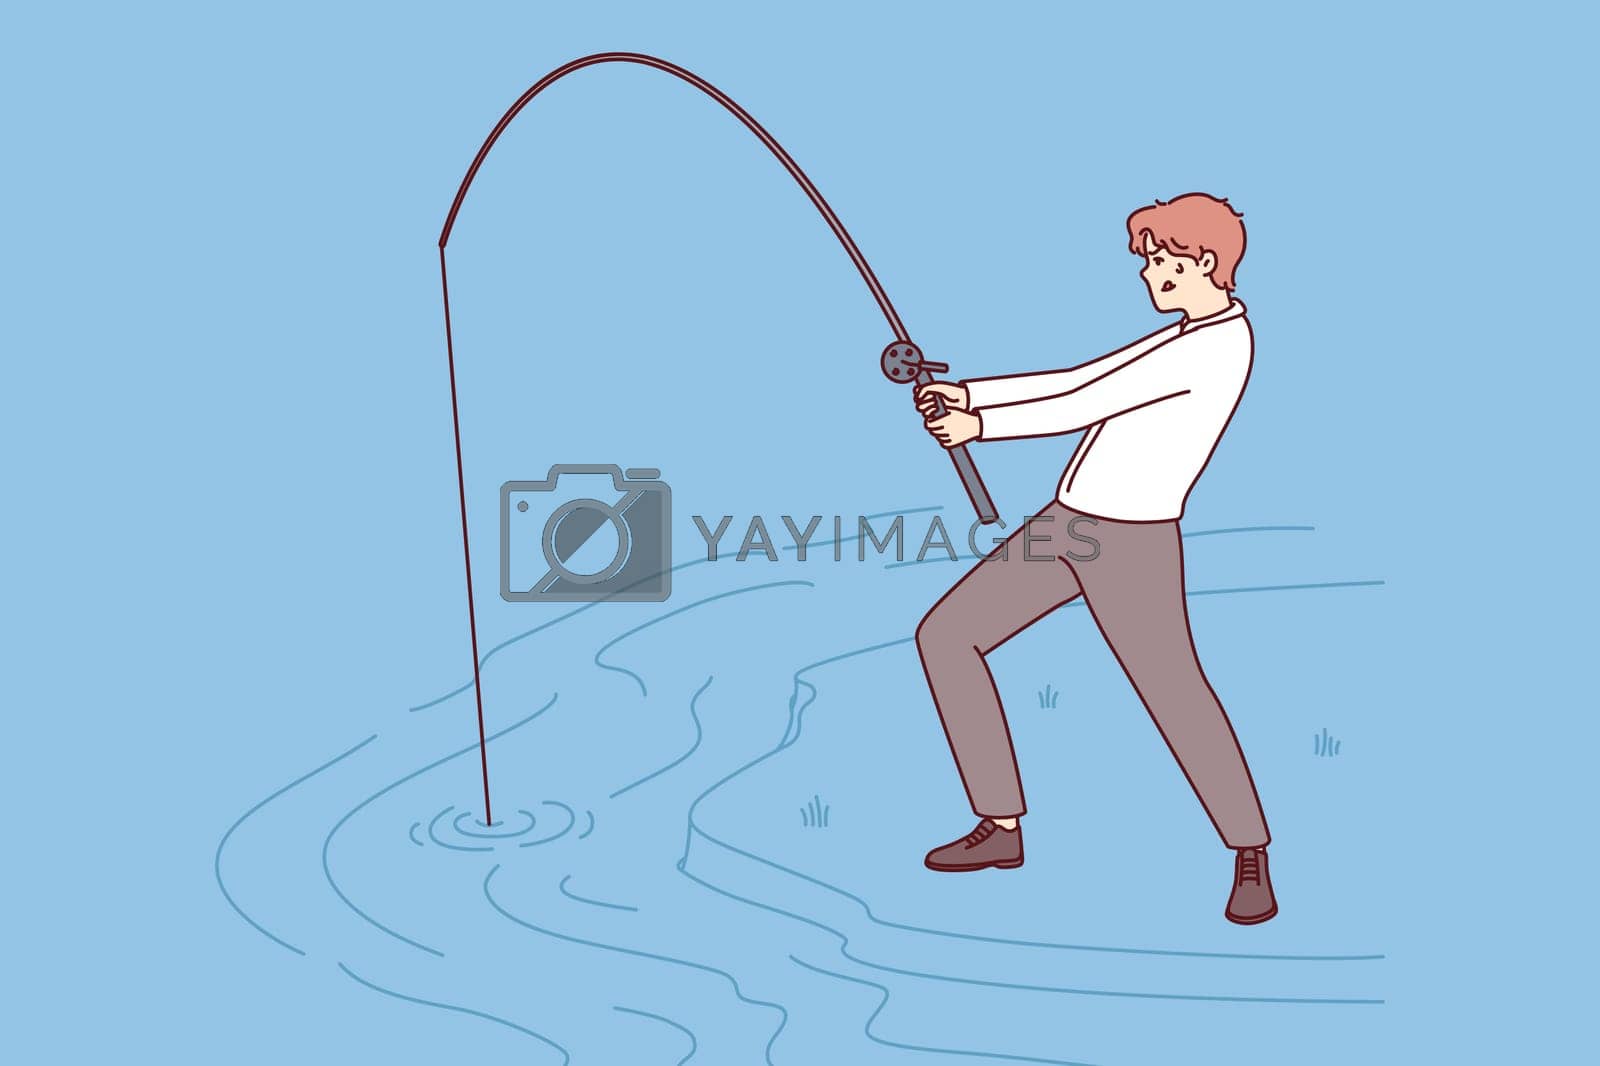 Royalty free image of Businessman with fishing rod fishing in river for concept of striving to achieve set goals by Vasilyeva